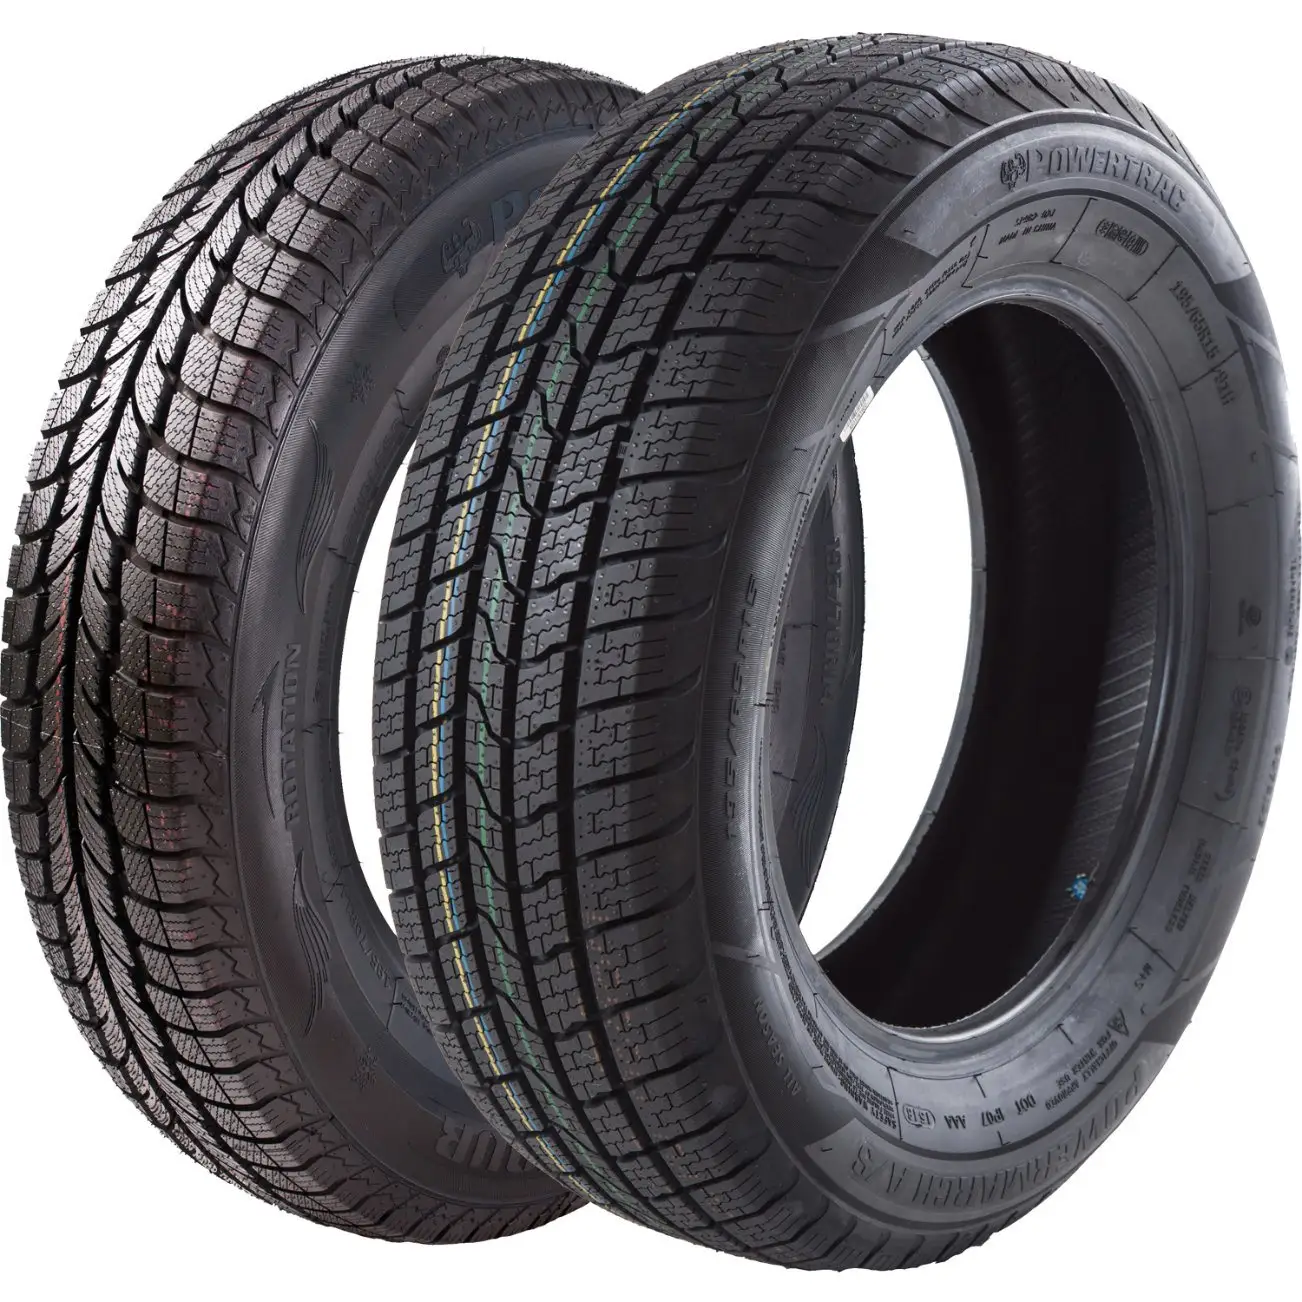 Best quality passenger car tires for sale Wholesale Used German car tryes ready to Export